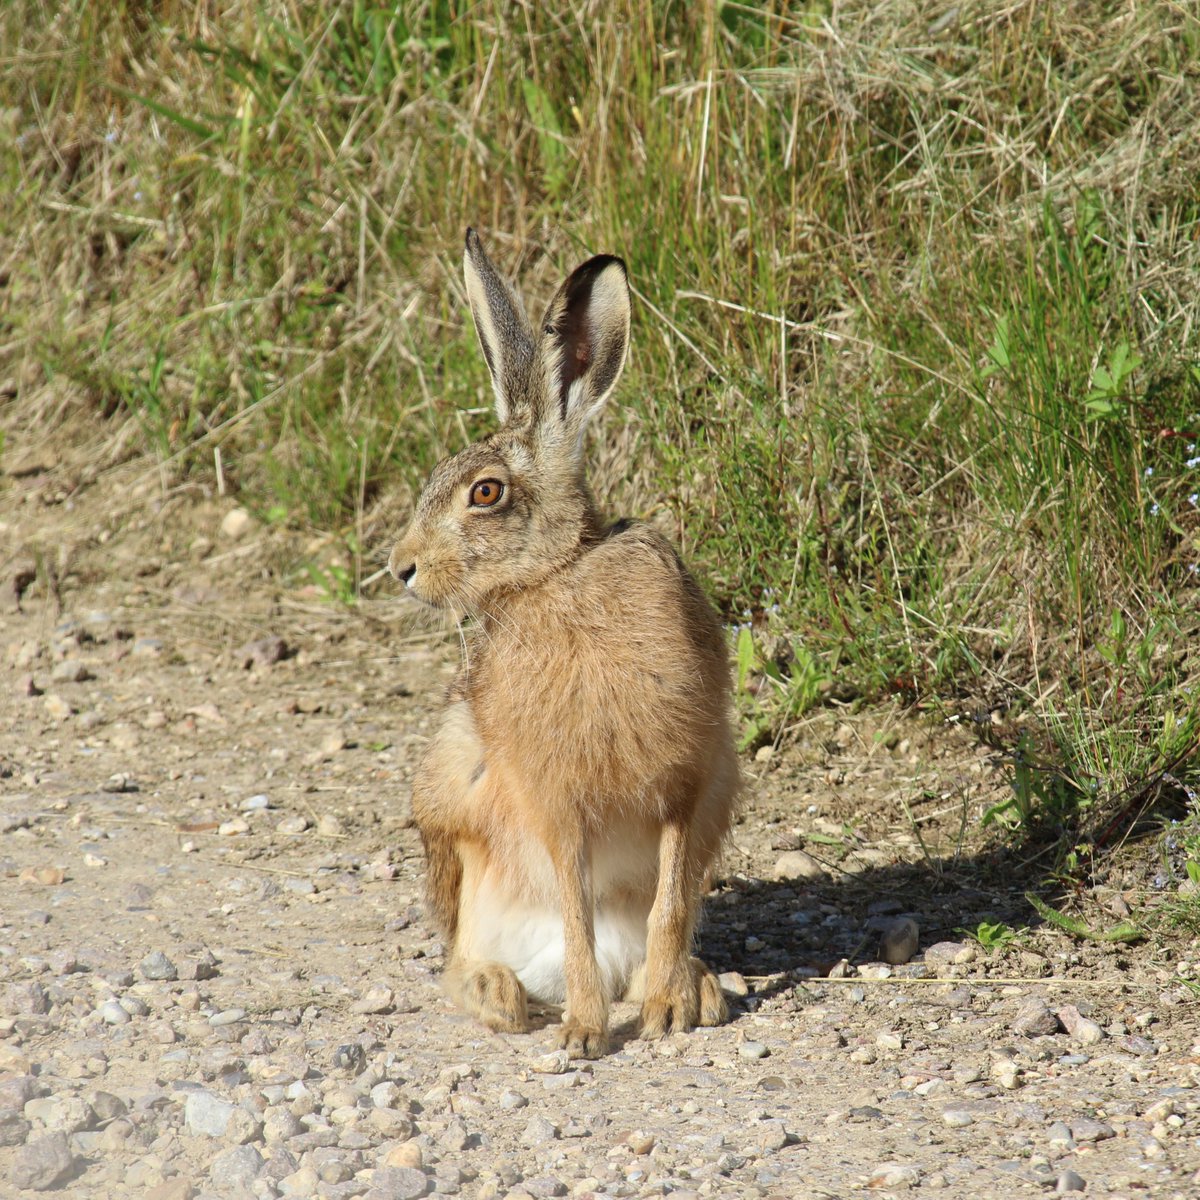 Now that #30DaysWild is over I can get back to wandering around #NatureReserves with my📸 favourite of the day was this close encounter with a Hare at Hide near Billets Farm #Abberton it sensed I was there but I was looking down from an angle😀 @EssexWildlife